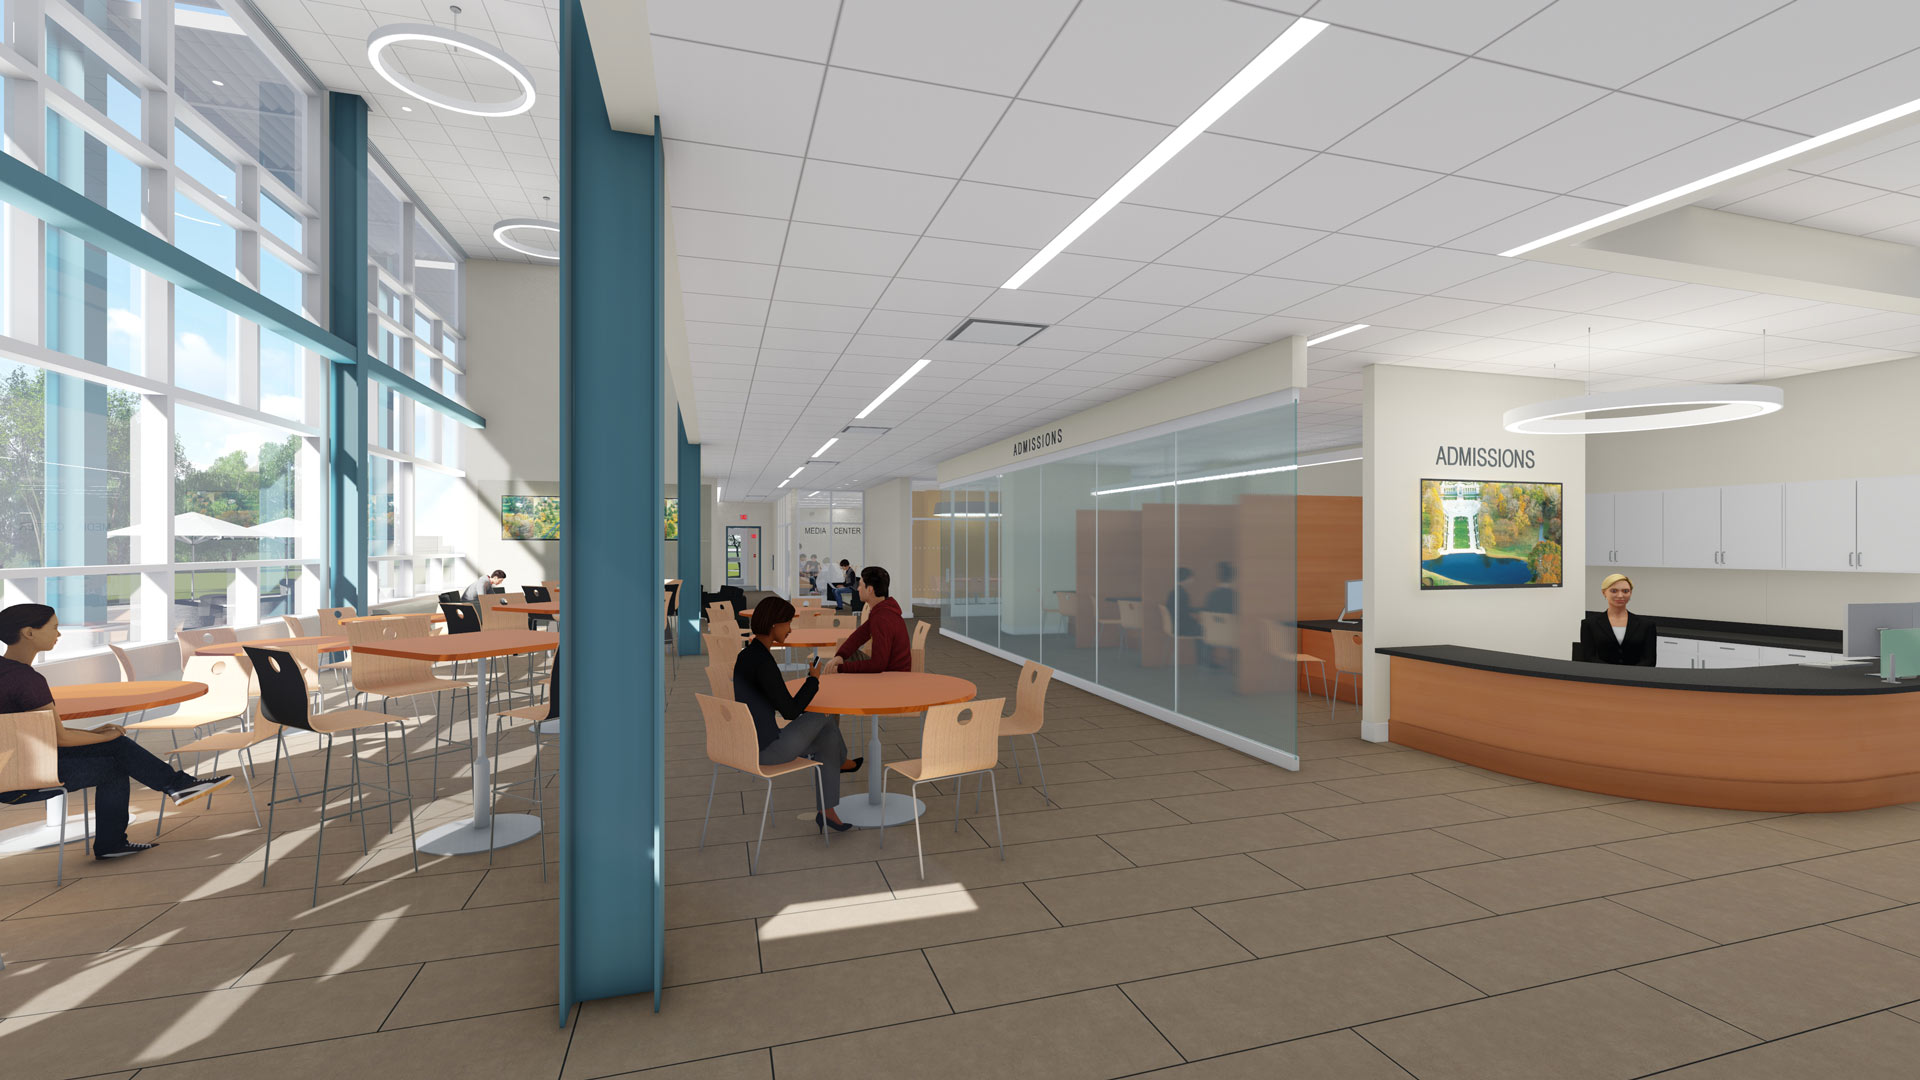 3-D rendering of student commons and admissions area